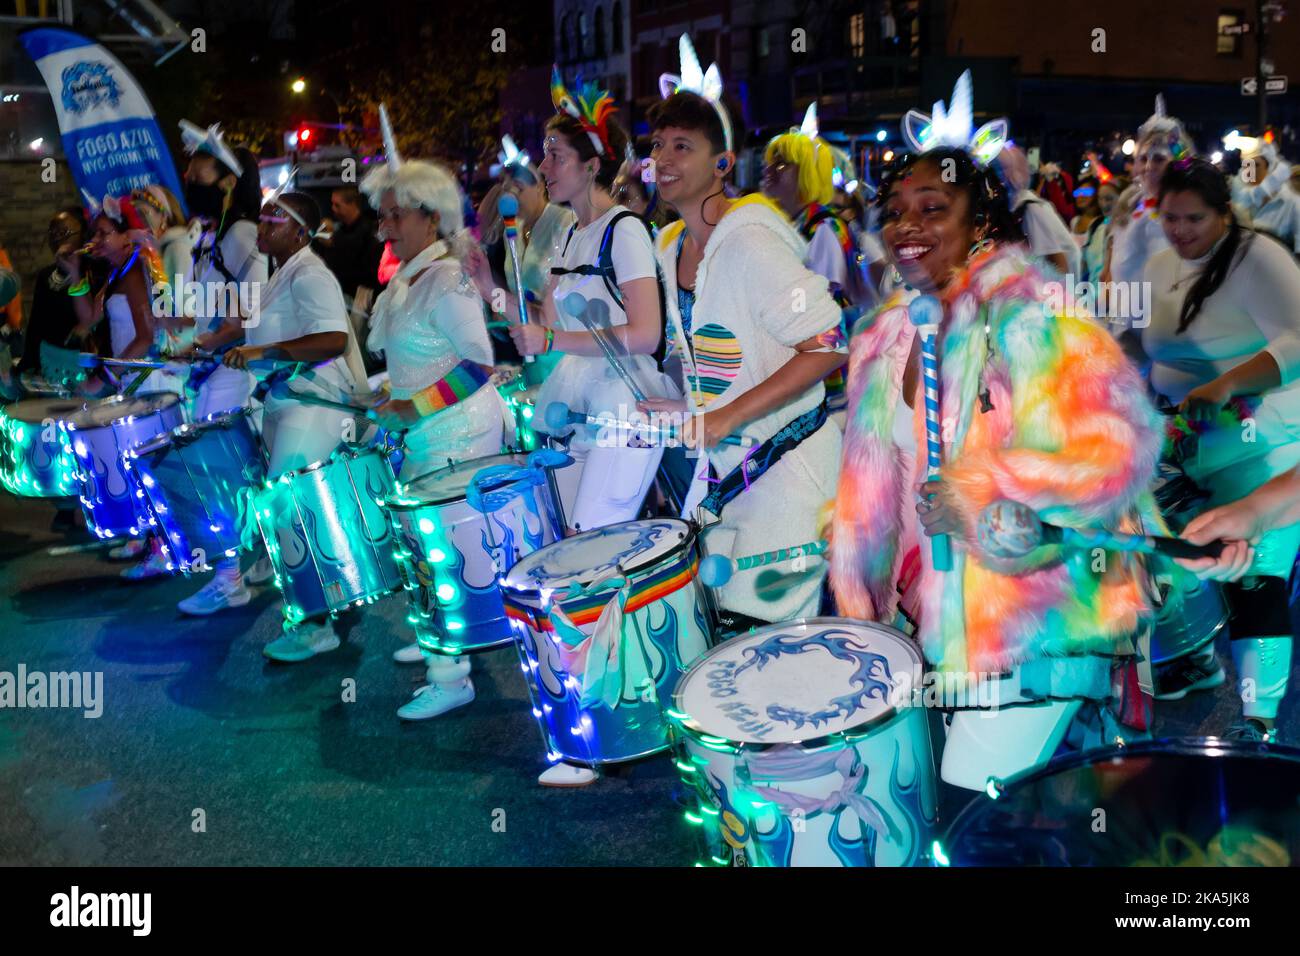 New York, NY, USA. 31st Oct, 2022. The annual Greenwich Village Halloween Parade drew crowds of costumed participants along with bands, dance troupes, stilt walkers, commercial floats, and giant puppets. The all-women drumline Fogo Aziul. Credit: Ed Lefkowicz/Alamy Live News Stock Photo